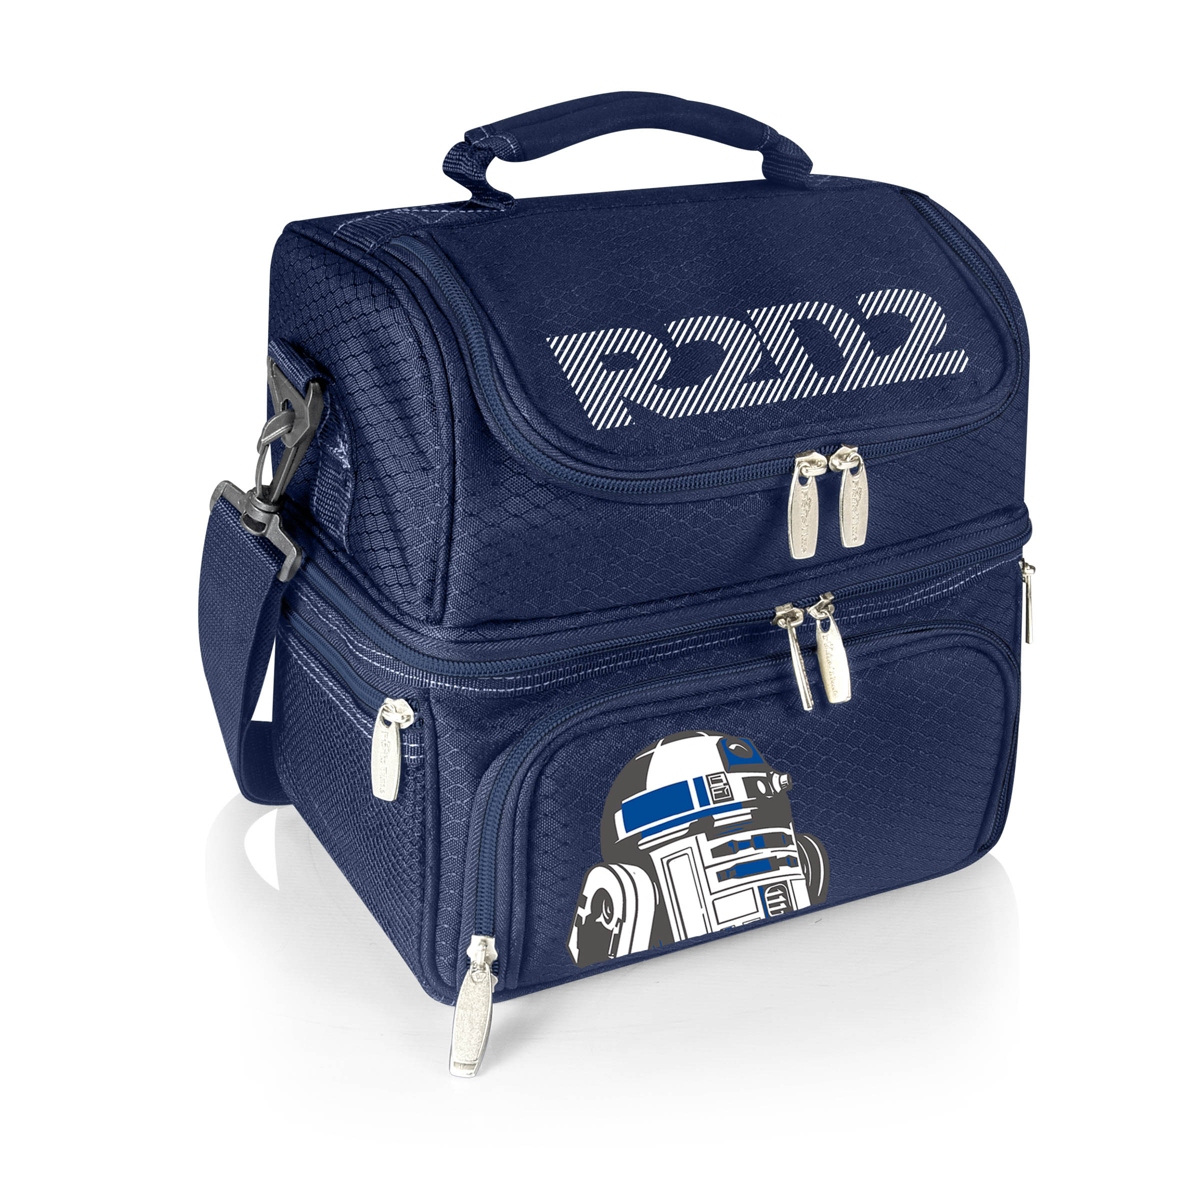 R2-D2 - Pranzo Lunch Tote - Navy